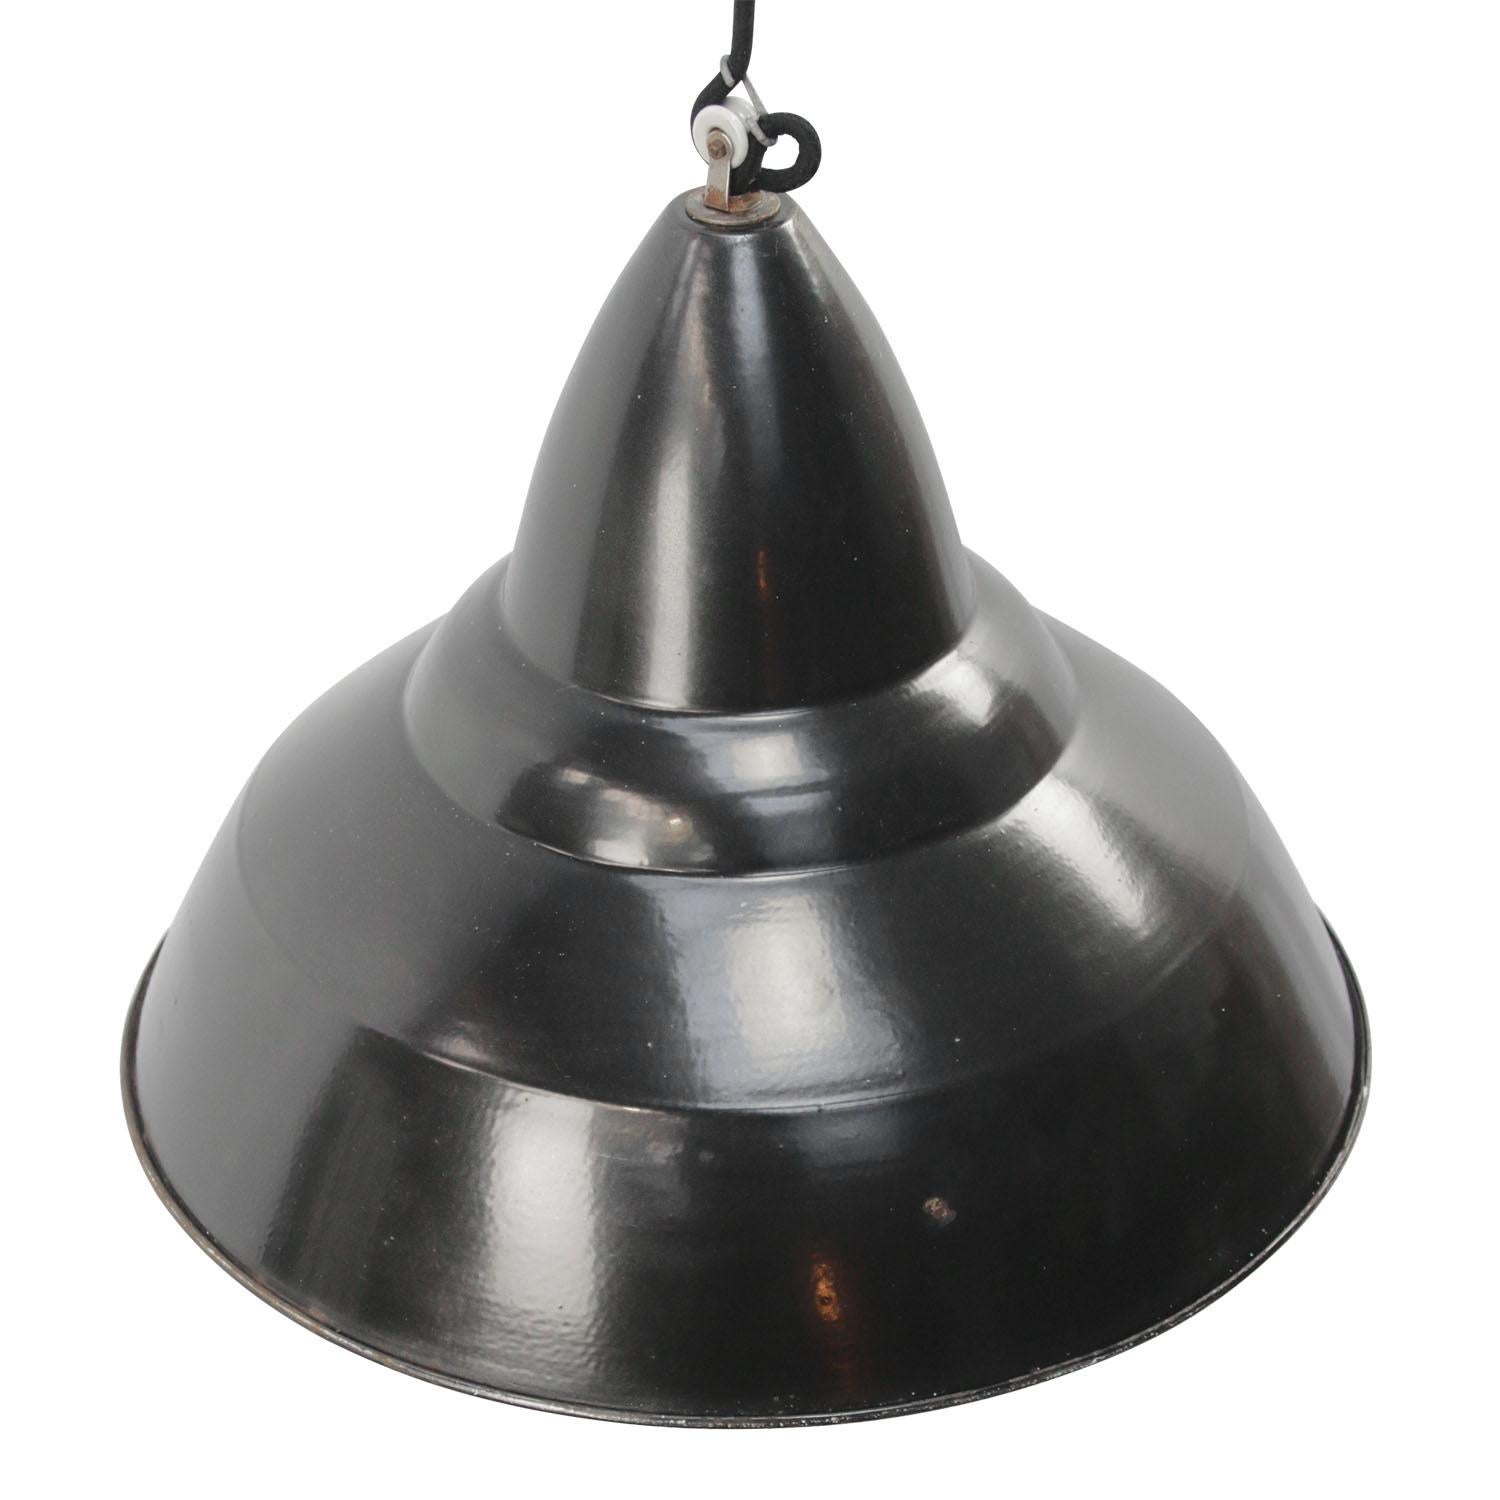 French industrial pendant lamps.
Black enamel, white inside

Weight: 1.90 kg / 4.2 lb

Priced per individual item. All lamps have been made suitable by international standards for incandescent light bulbs, energy-efficient and LED bulbs.